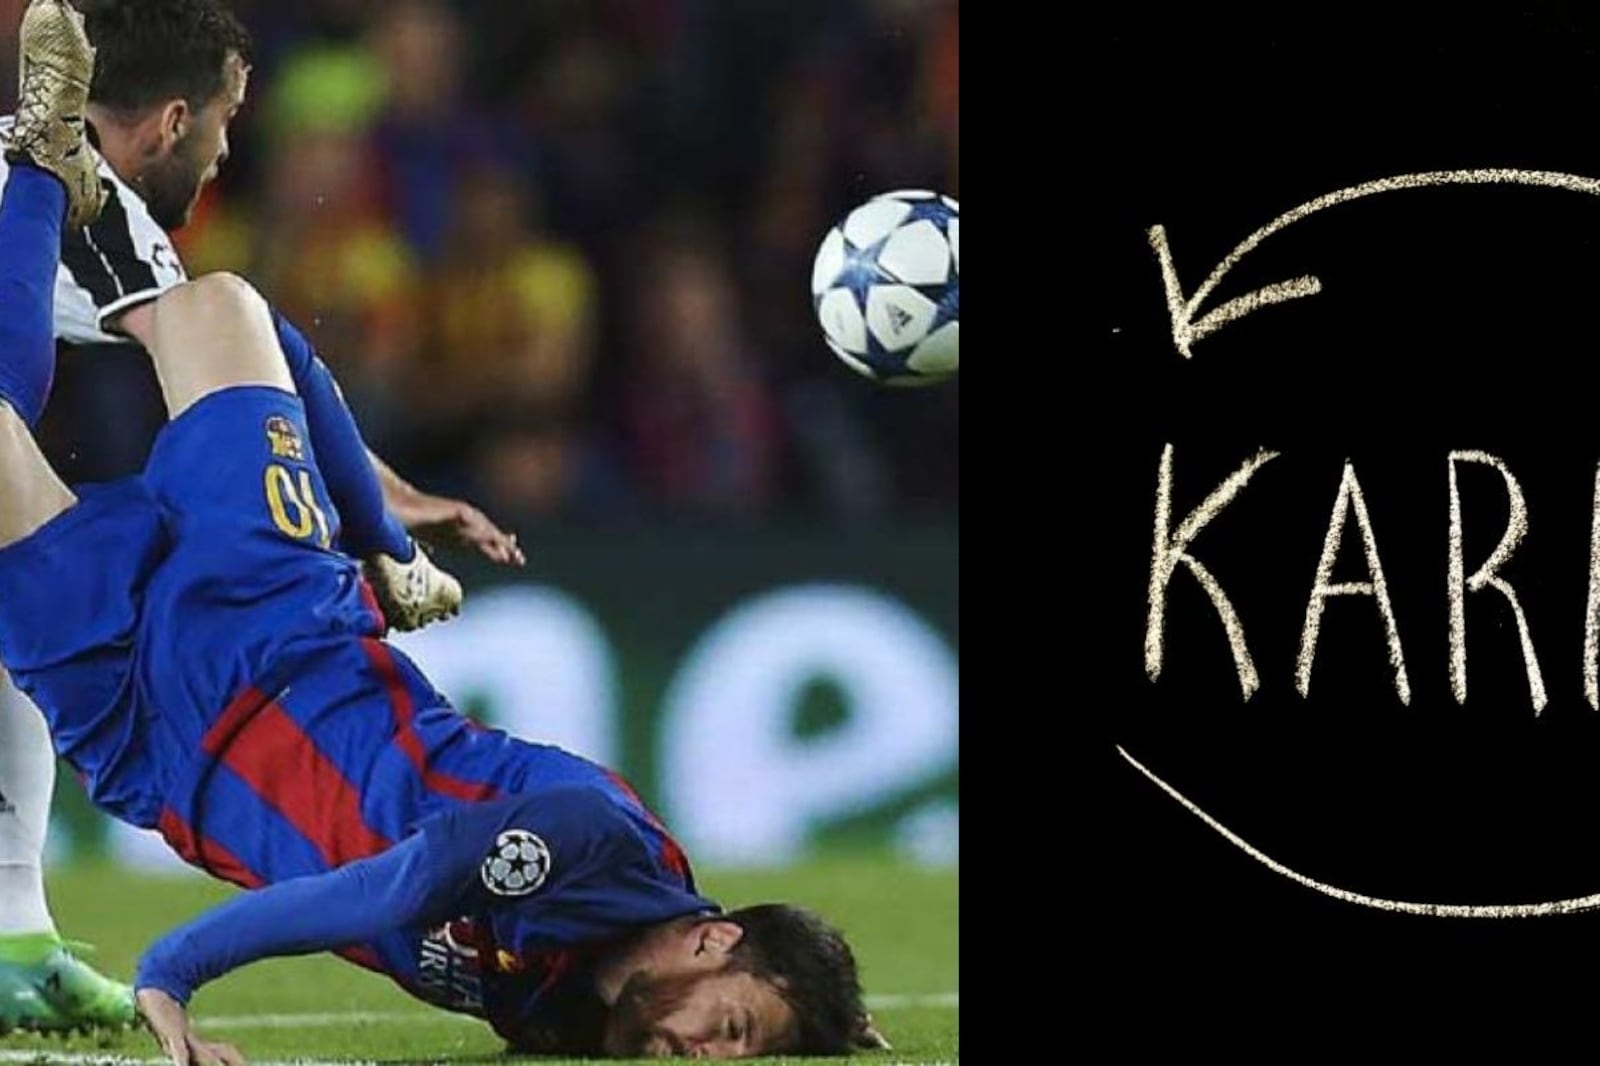 He wanted to hit Lionel Messi, now karma hits him and he will lose 54 million